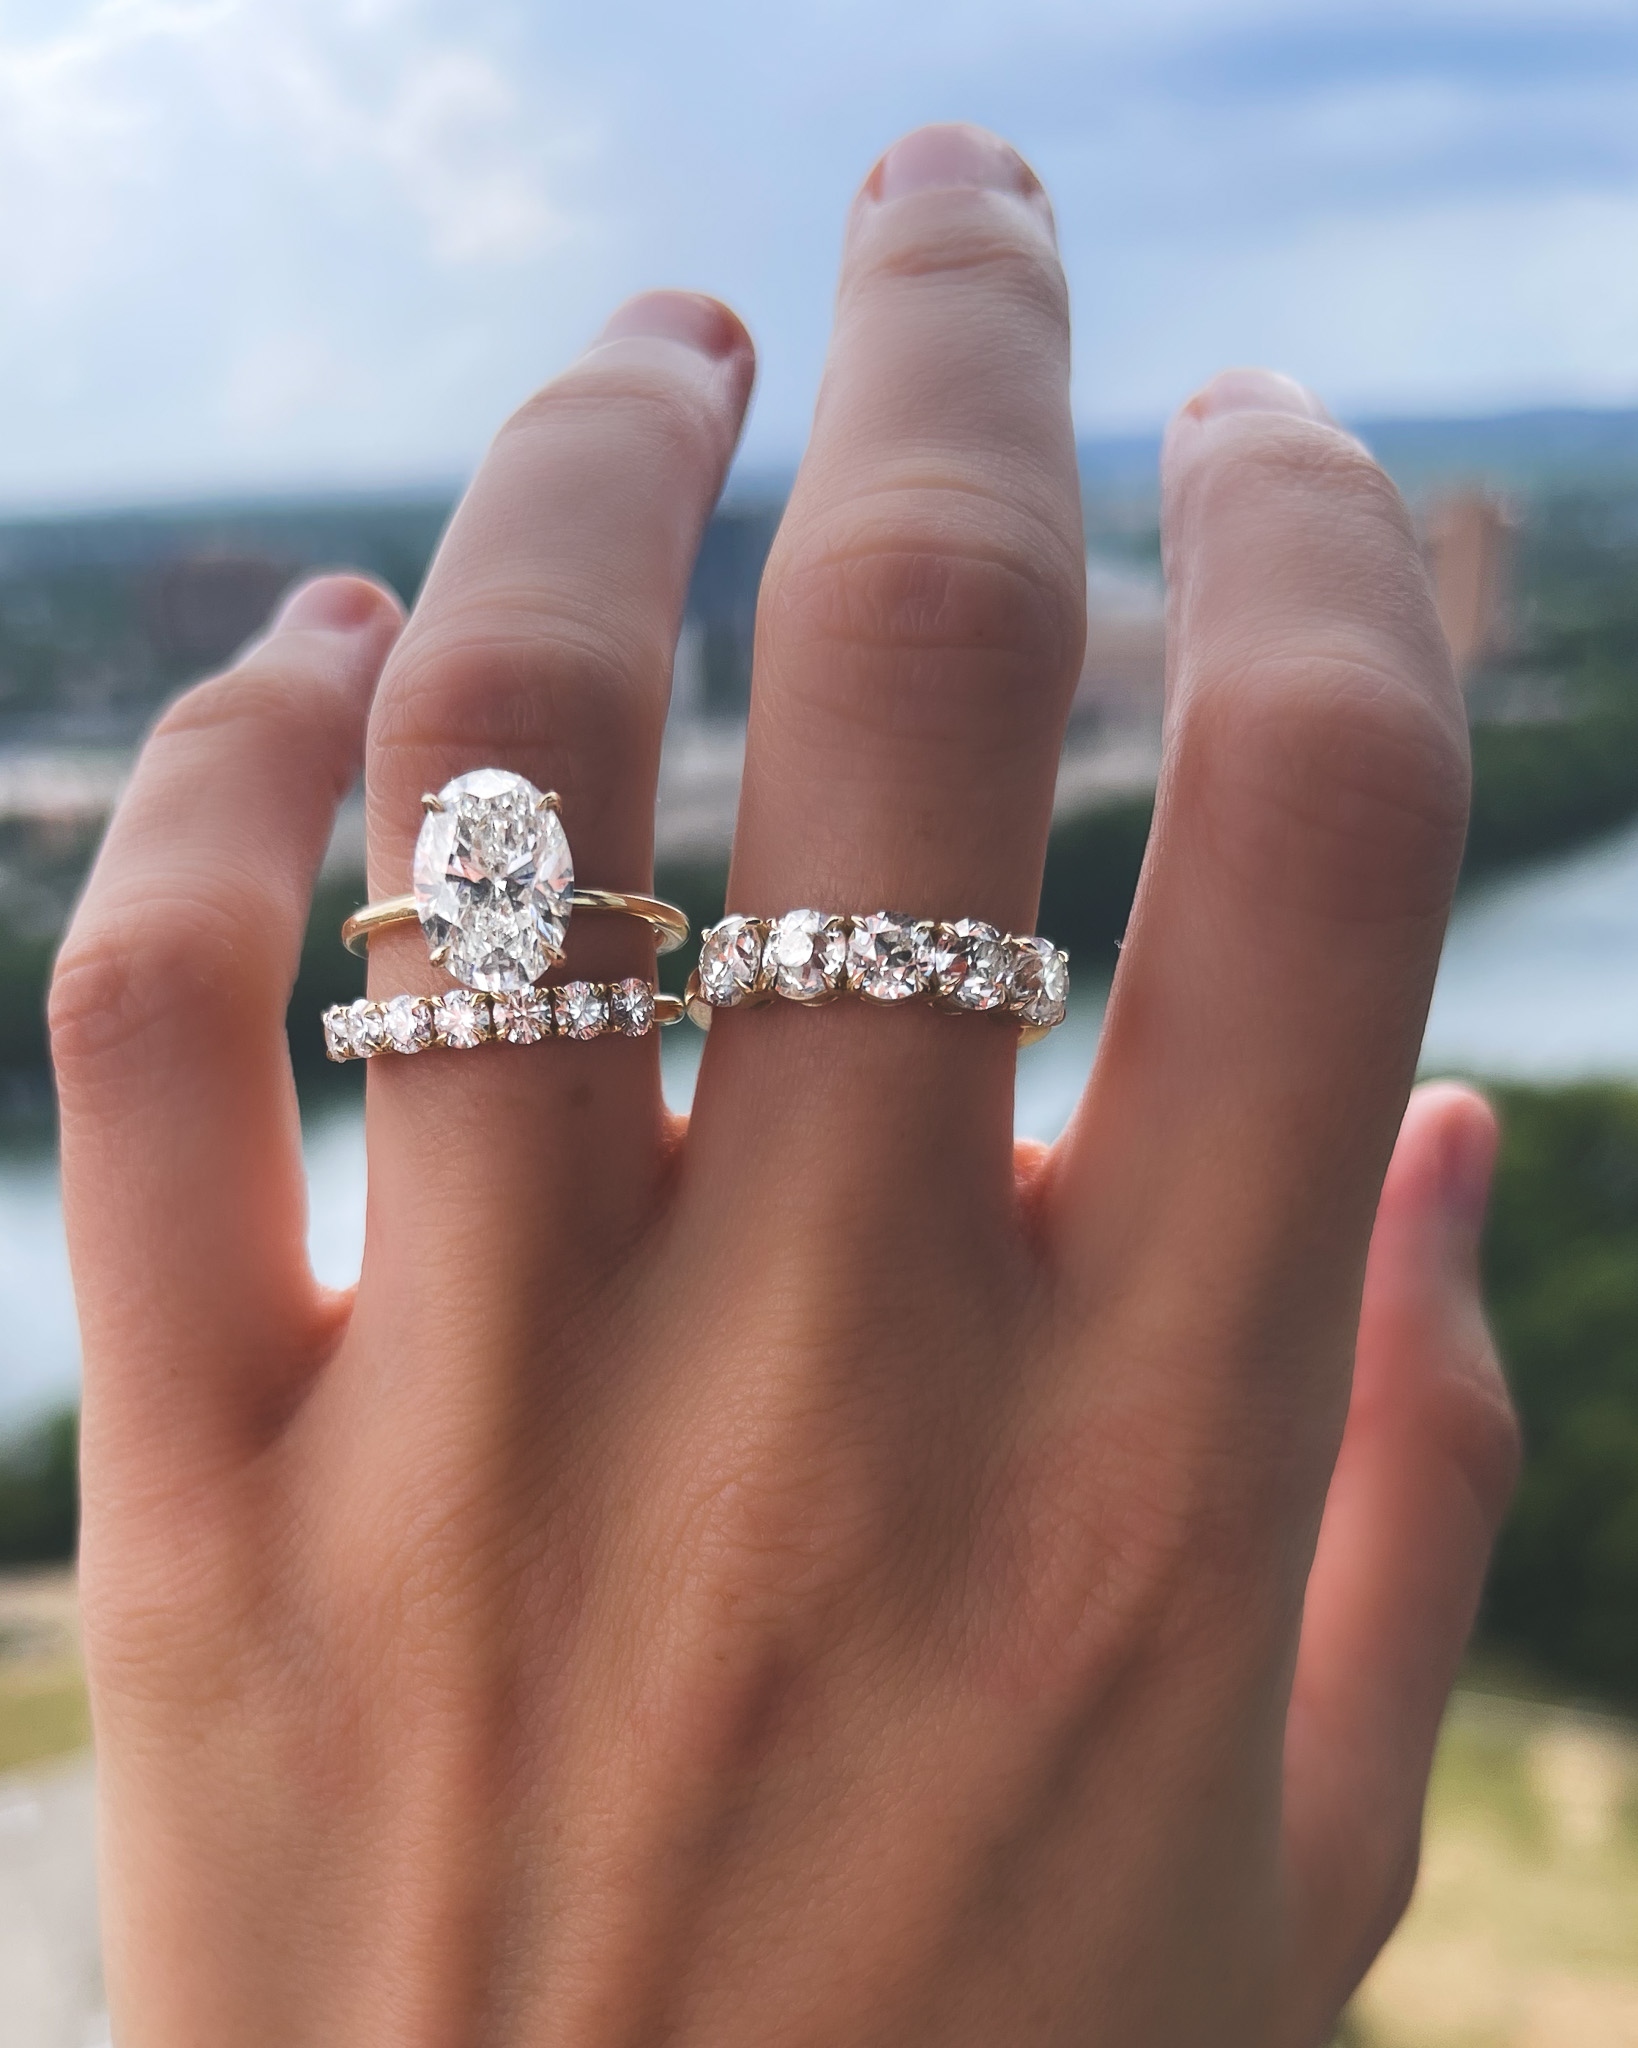 A stunning image showcasing the perfect pairing of an oval engagement ring with wedding band. The wedding band perfectly complements the oval shape of the engagement ring, creating a beautiful and cohesive look.